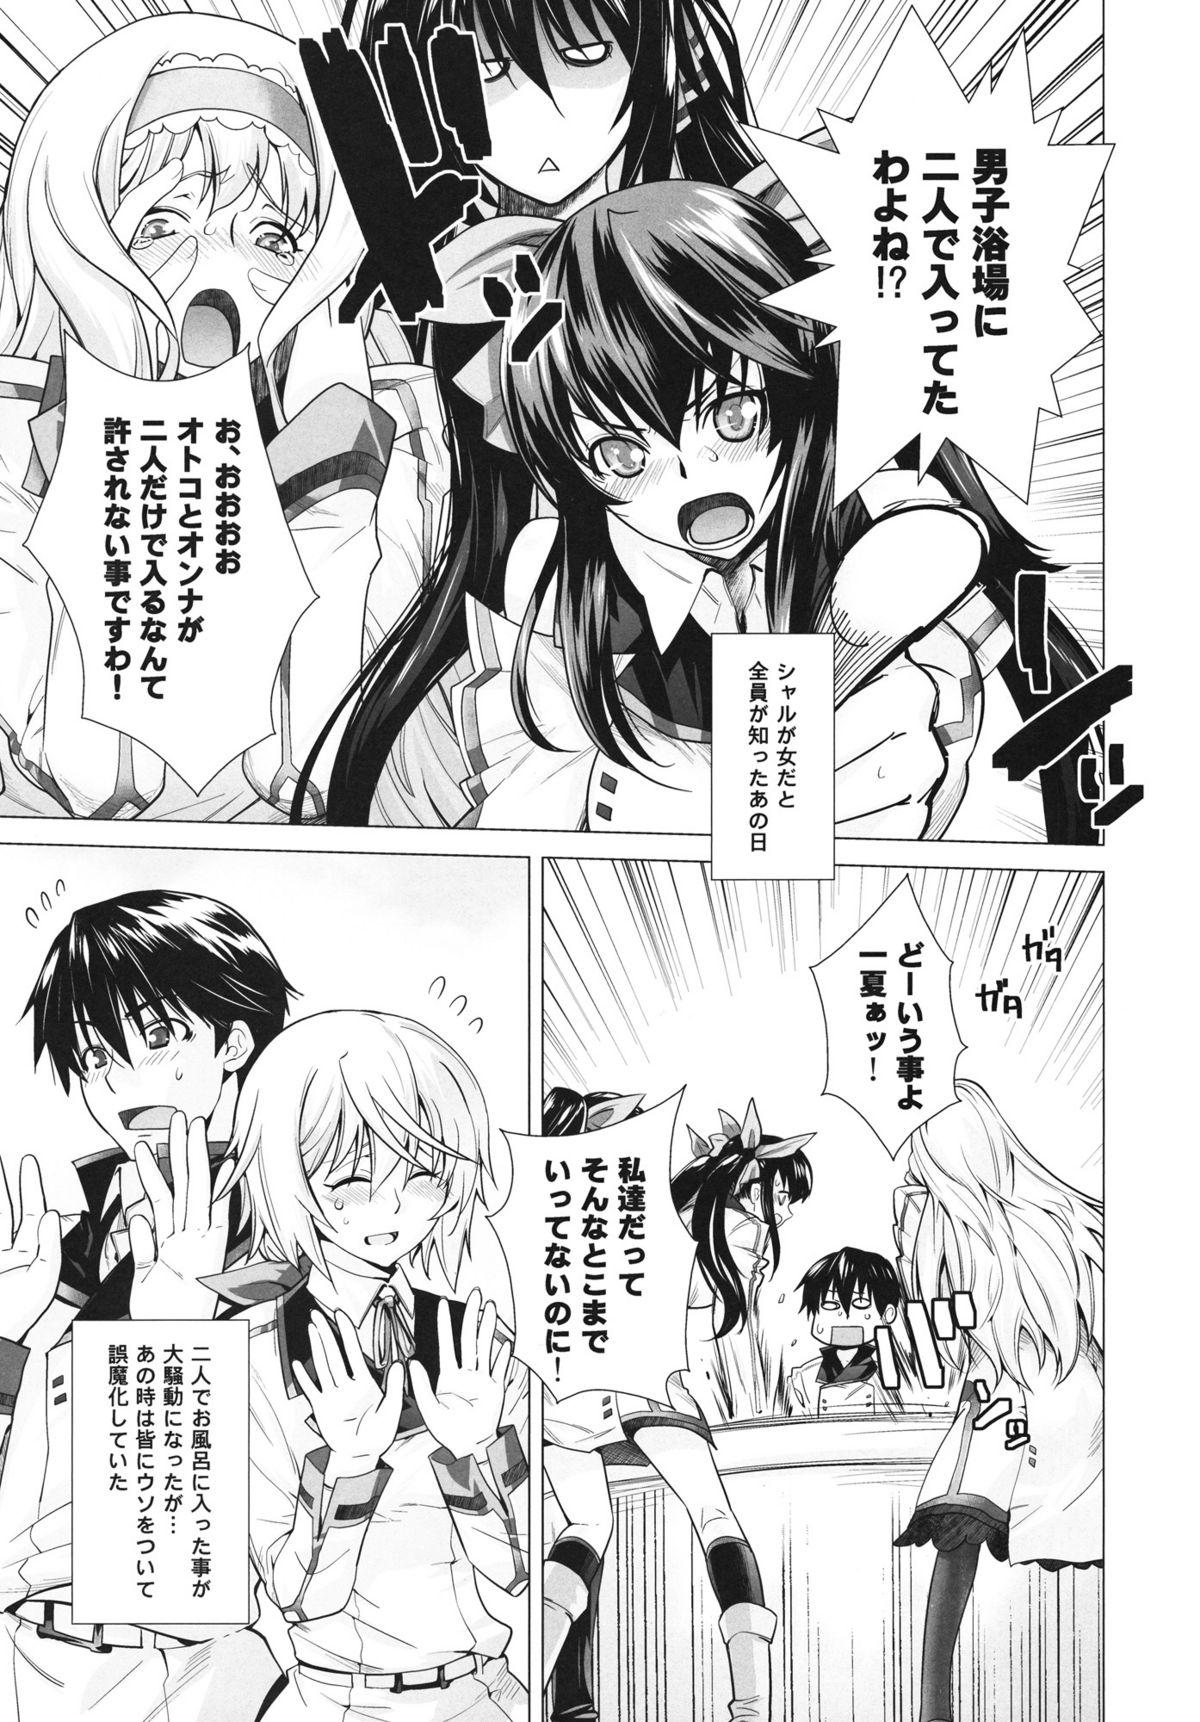 Spit Love Slave - Infinite stratos Leather - Page 6